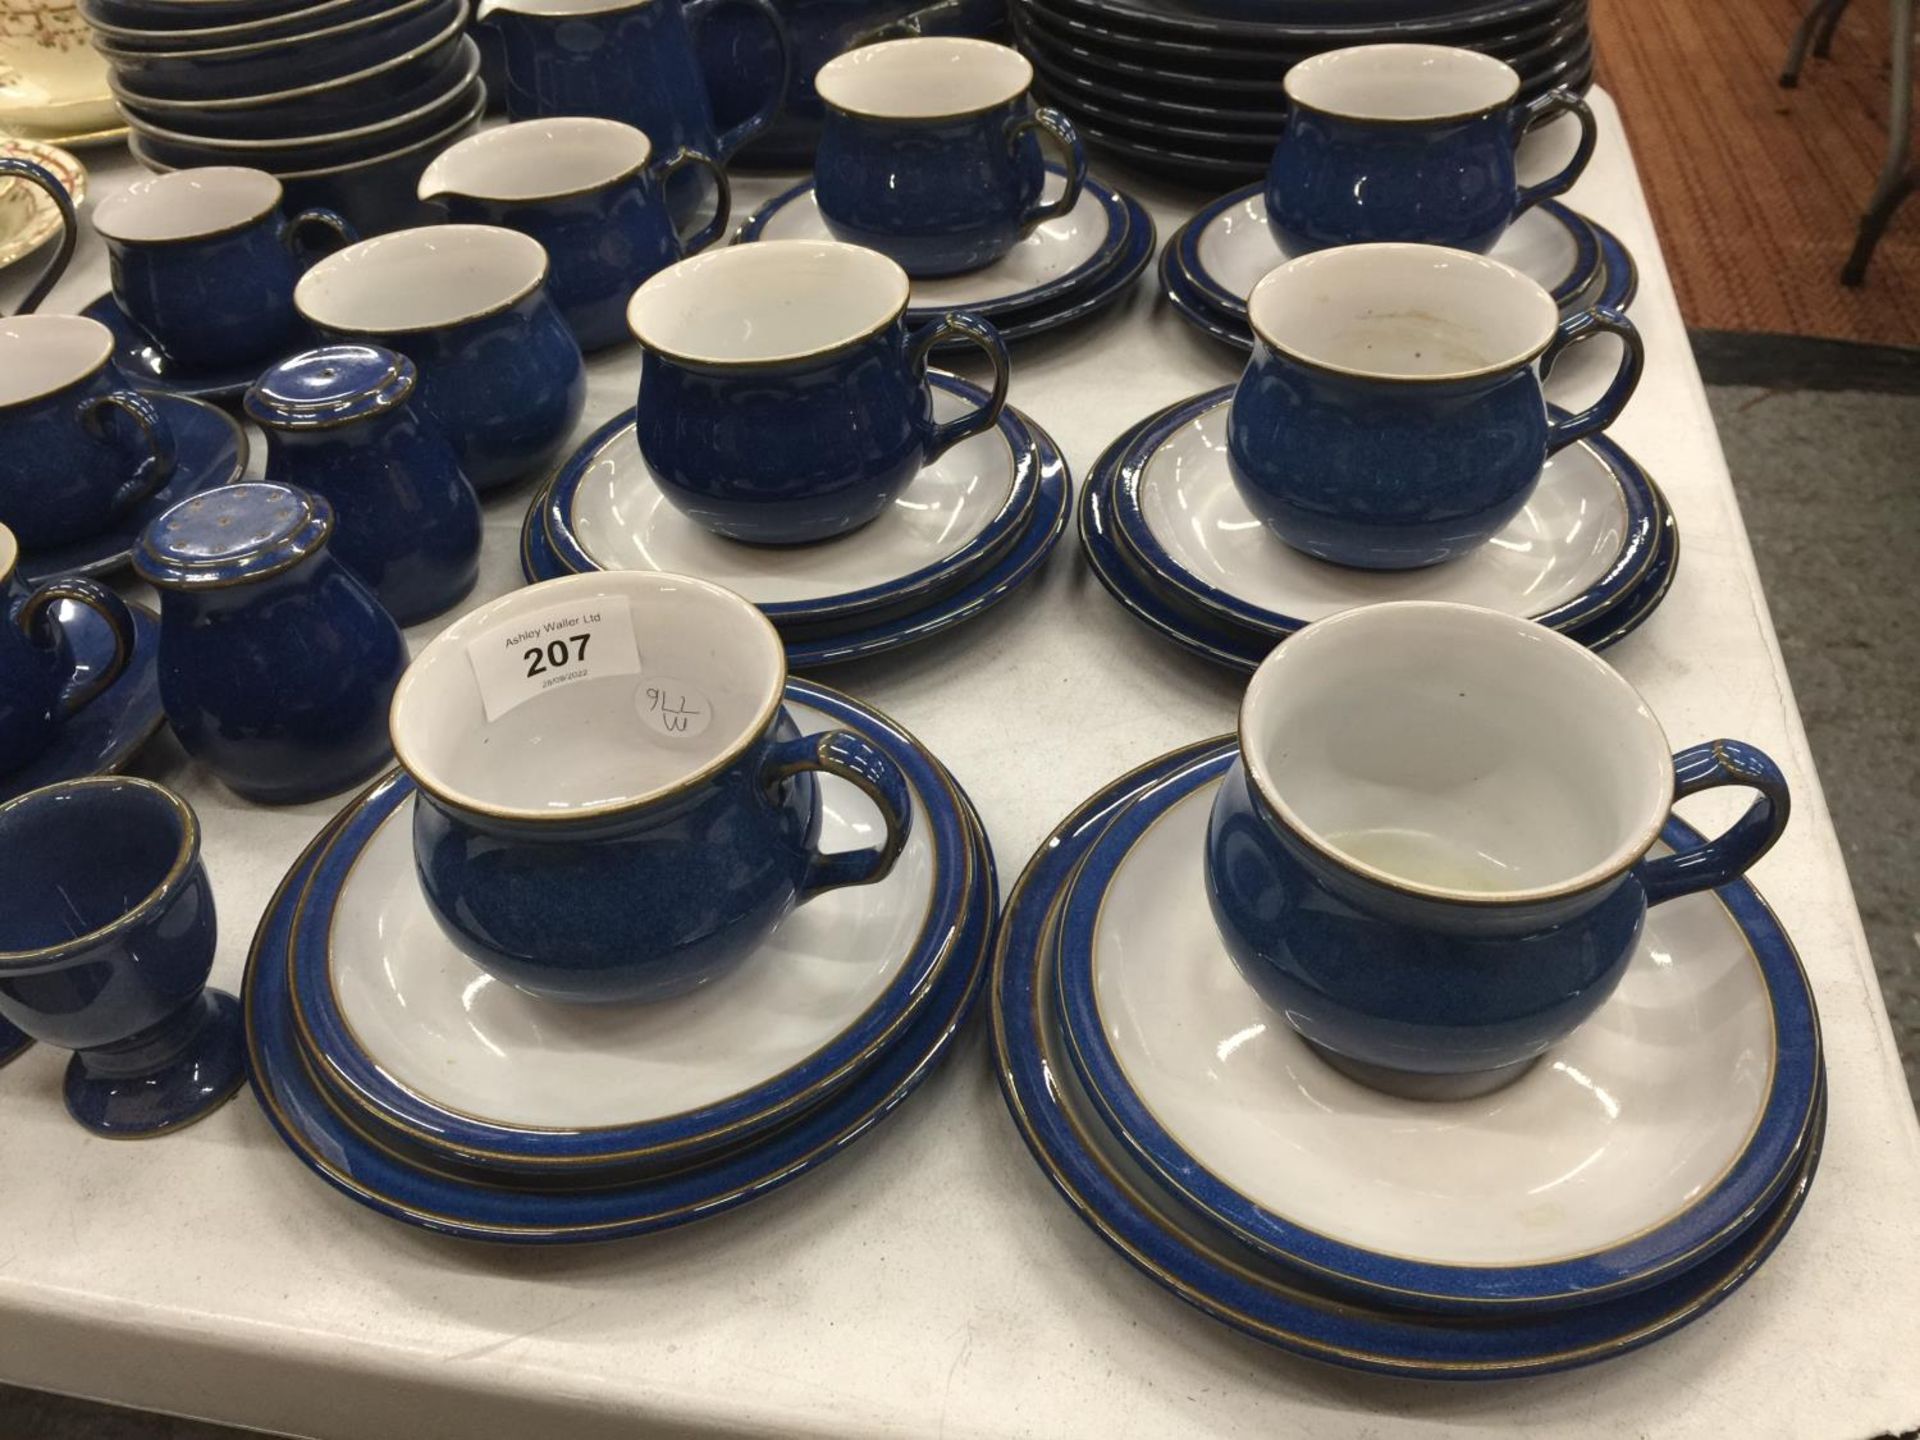 A DENBY DINNER SERVICE IN BLUE TO INCLUDE PLATES, BOWLS, TEAPOTS, SERVING TUREEN, MILK JUGS, SUGAR - Image 2 of 9